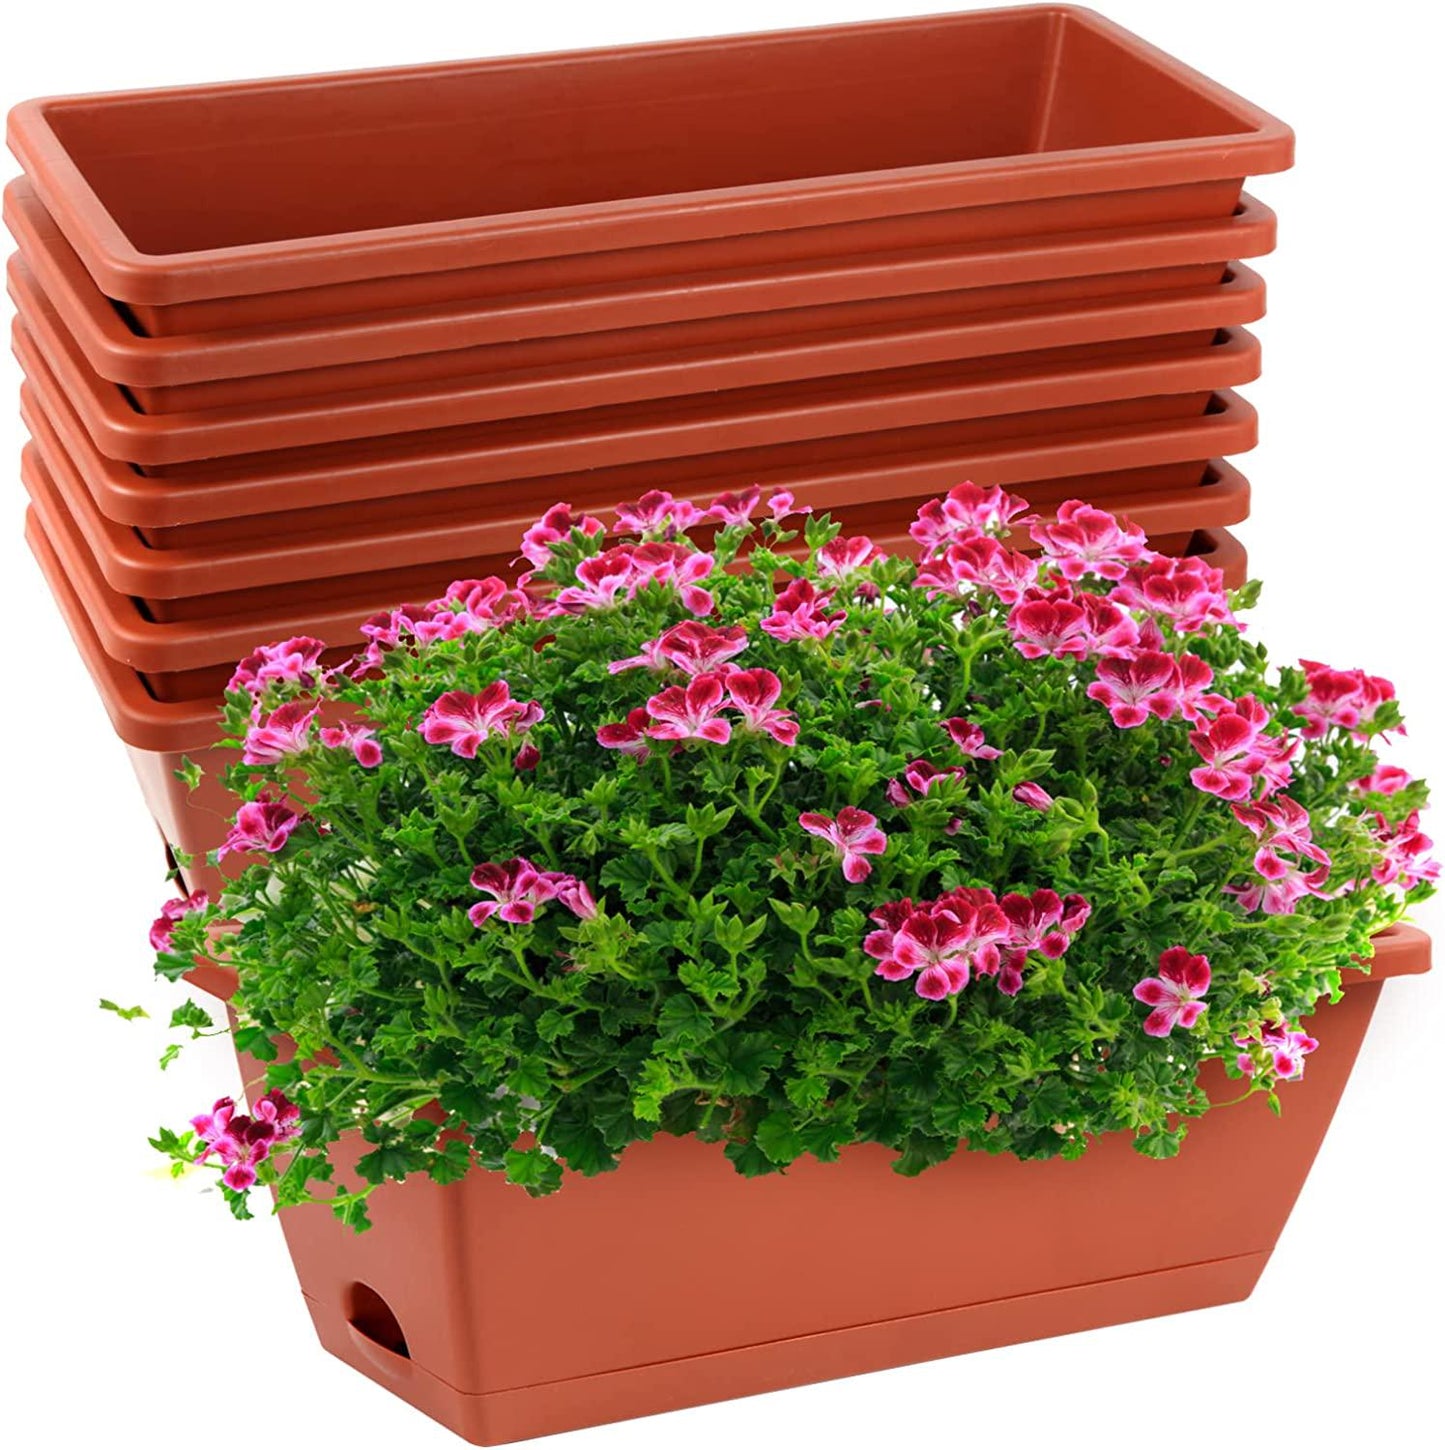 8pcs Window Box Planter,17 Inches Flower Window Boxes, Rectangle Planters Box with Drainage Holes and Trays, Plastic Vegetable Planters for Windowsill Patio Garden Home Decor Porch Yard (Red)-